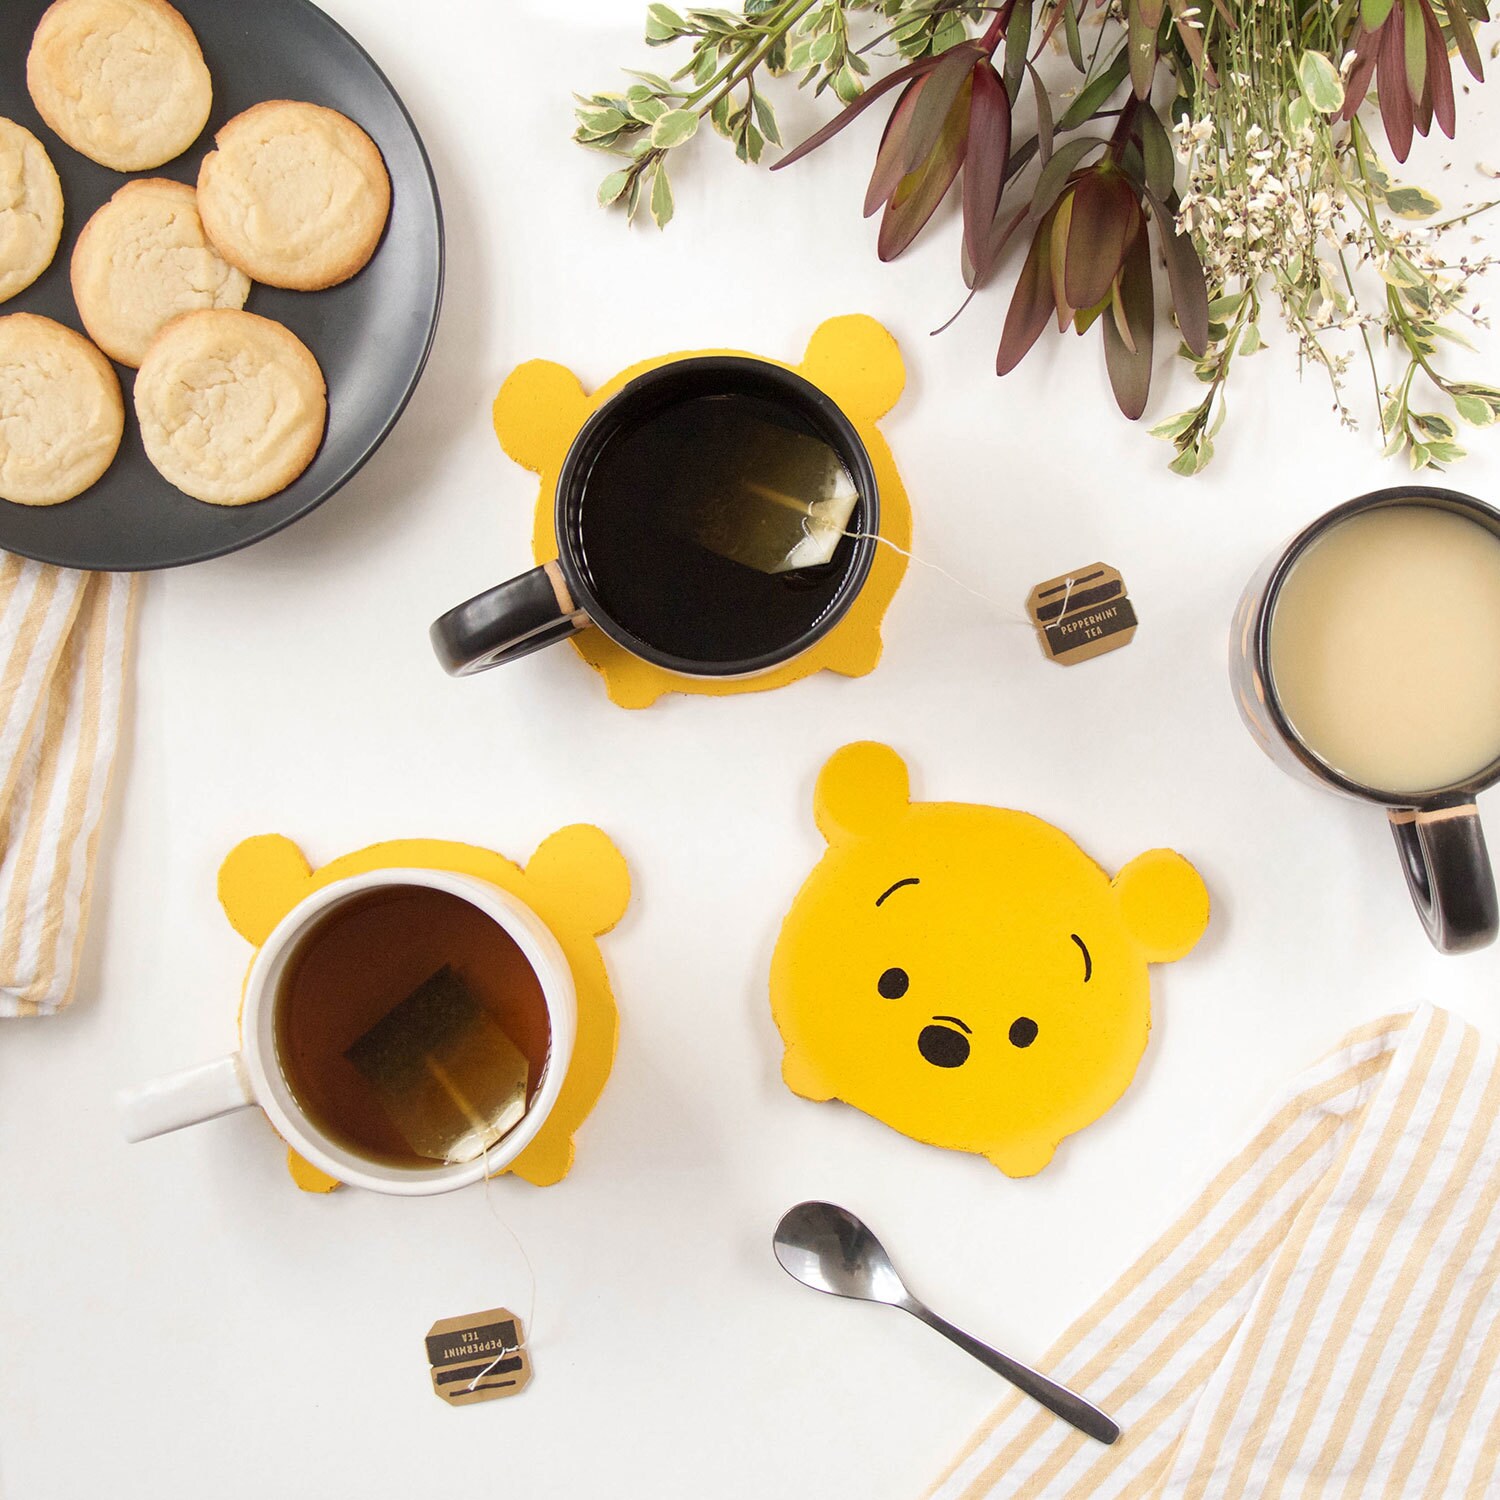 Several coasters decorated like Winnie the Pooh on a table with mugs and cookies.